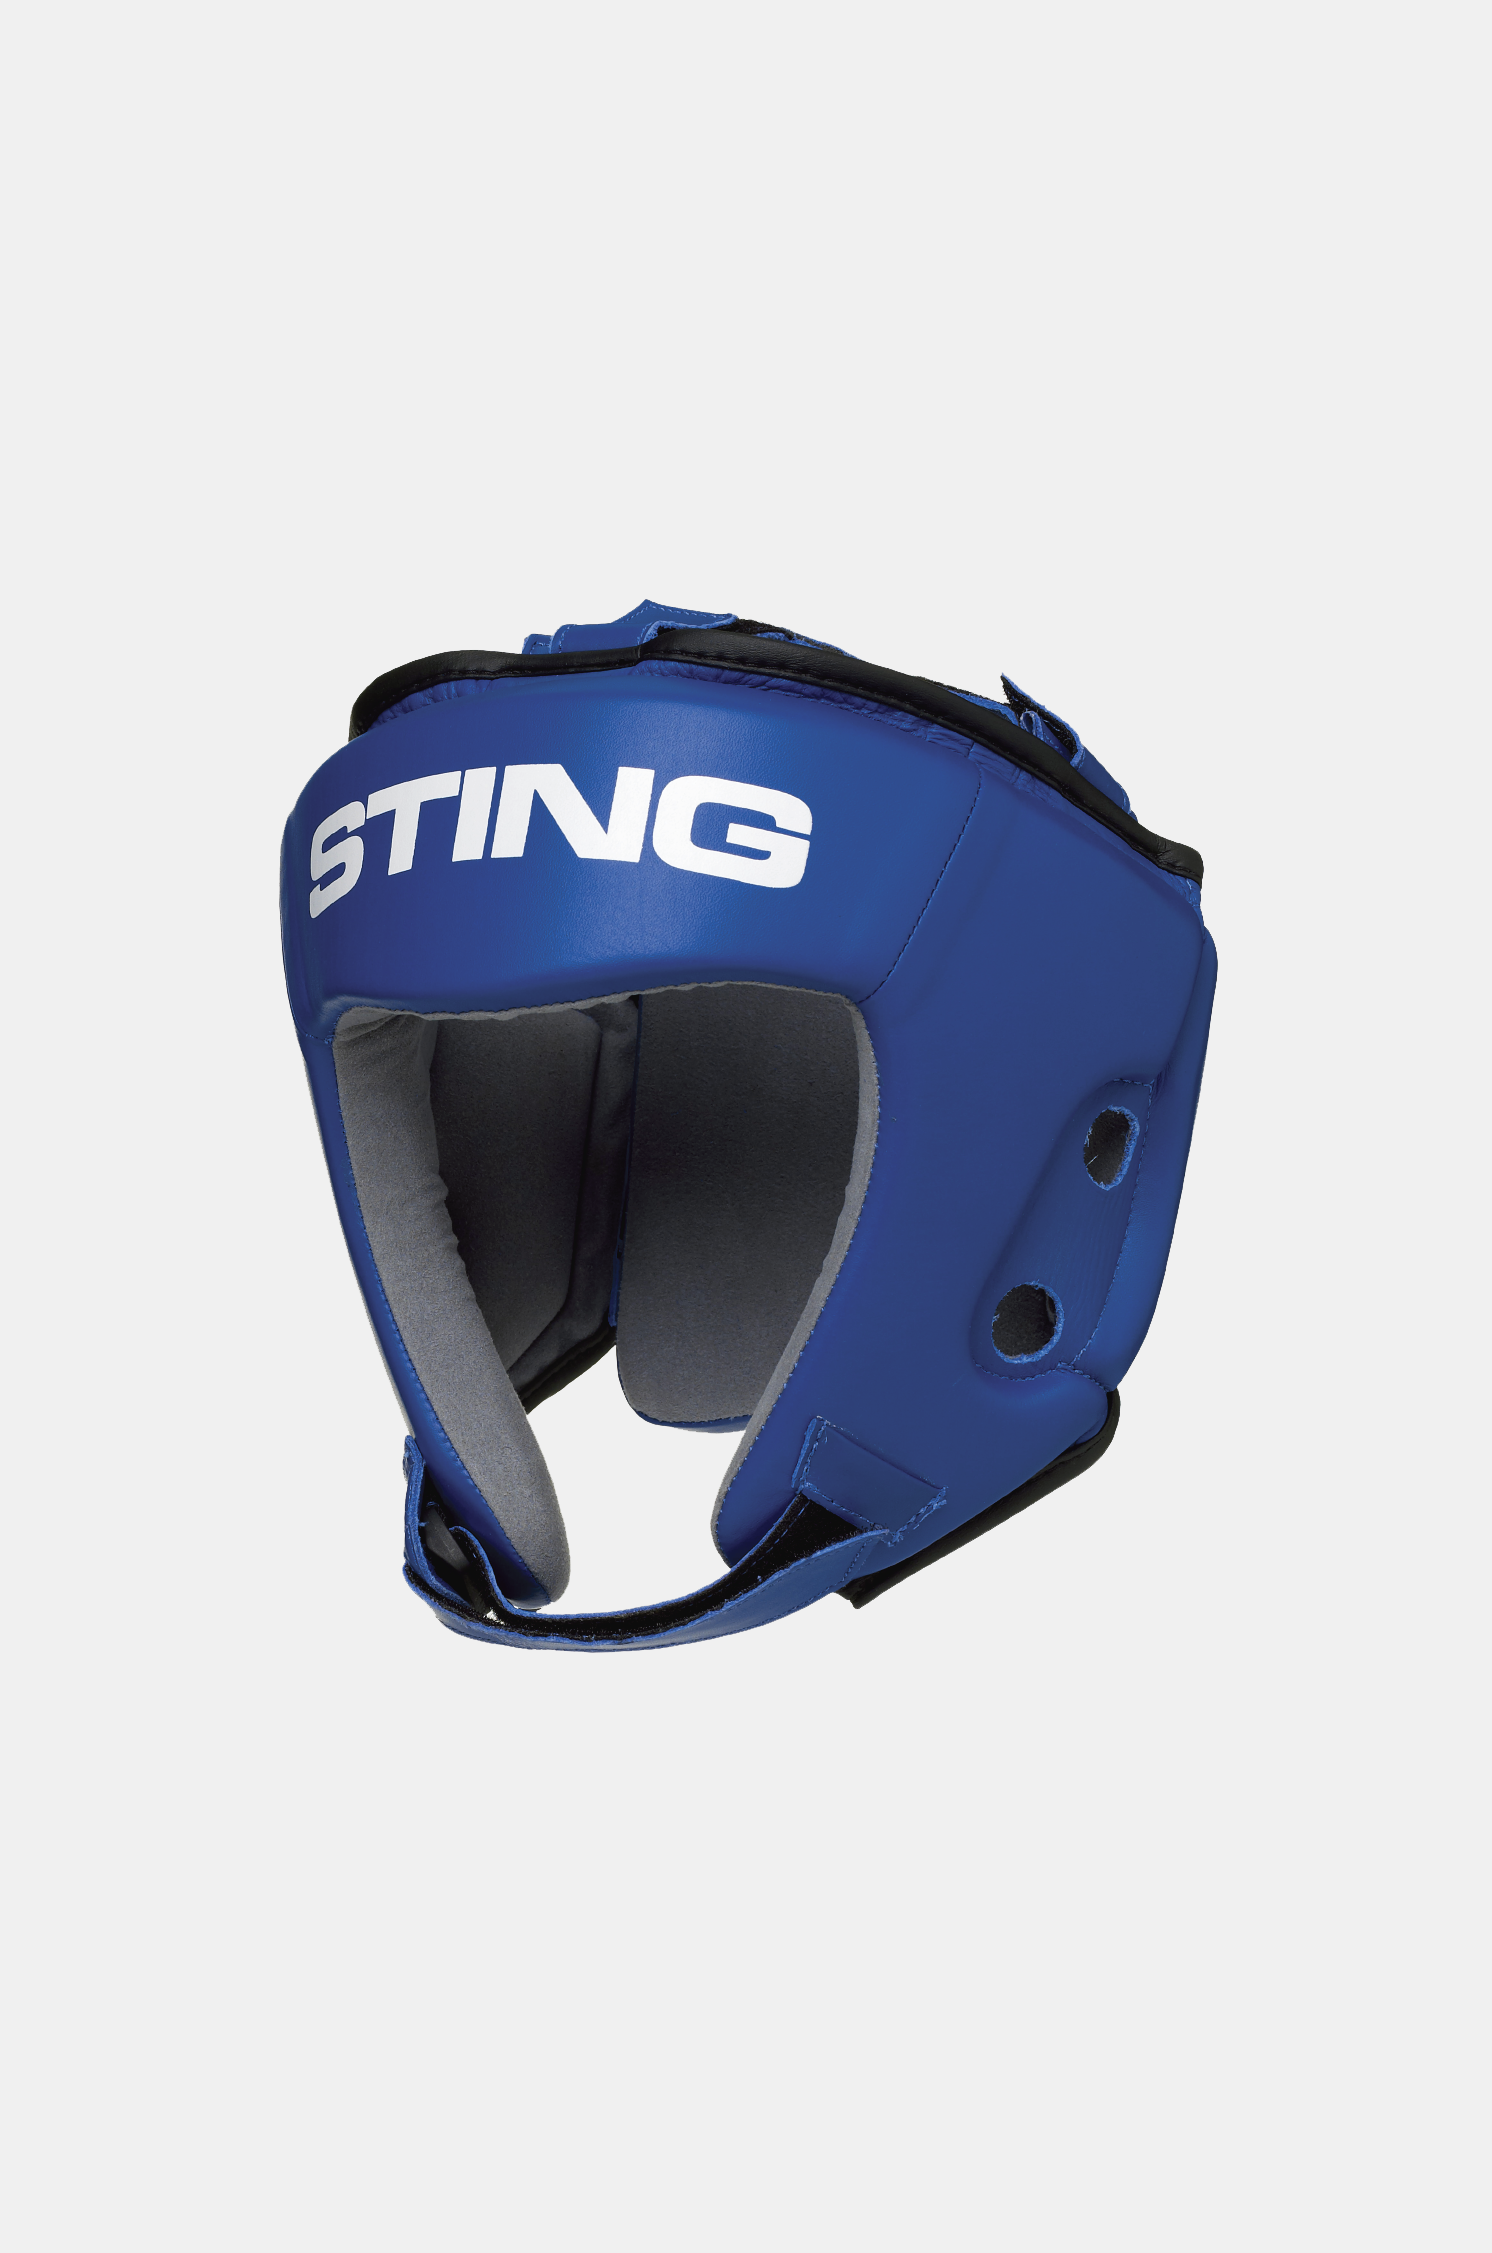 Sting IBA Competition Boxing Head Guard STING